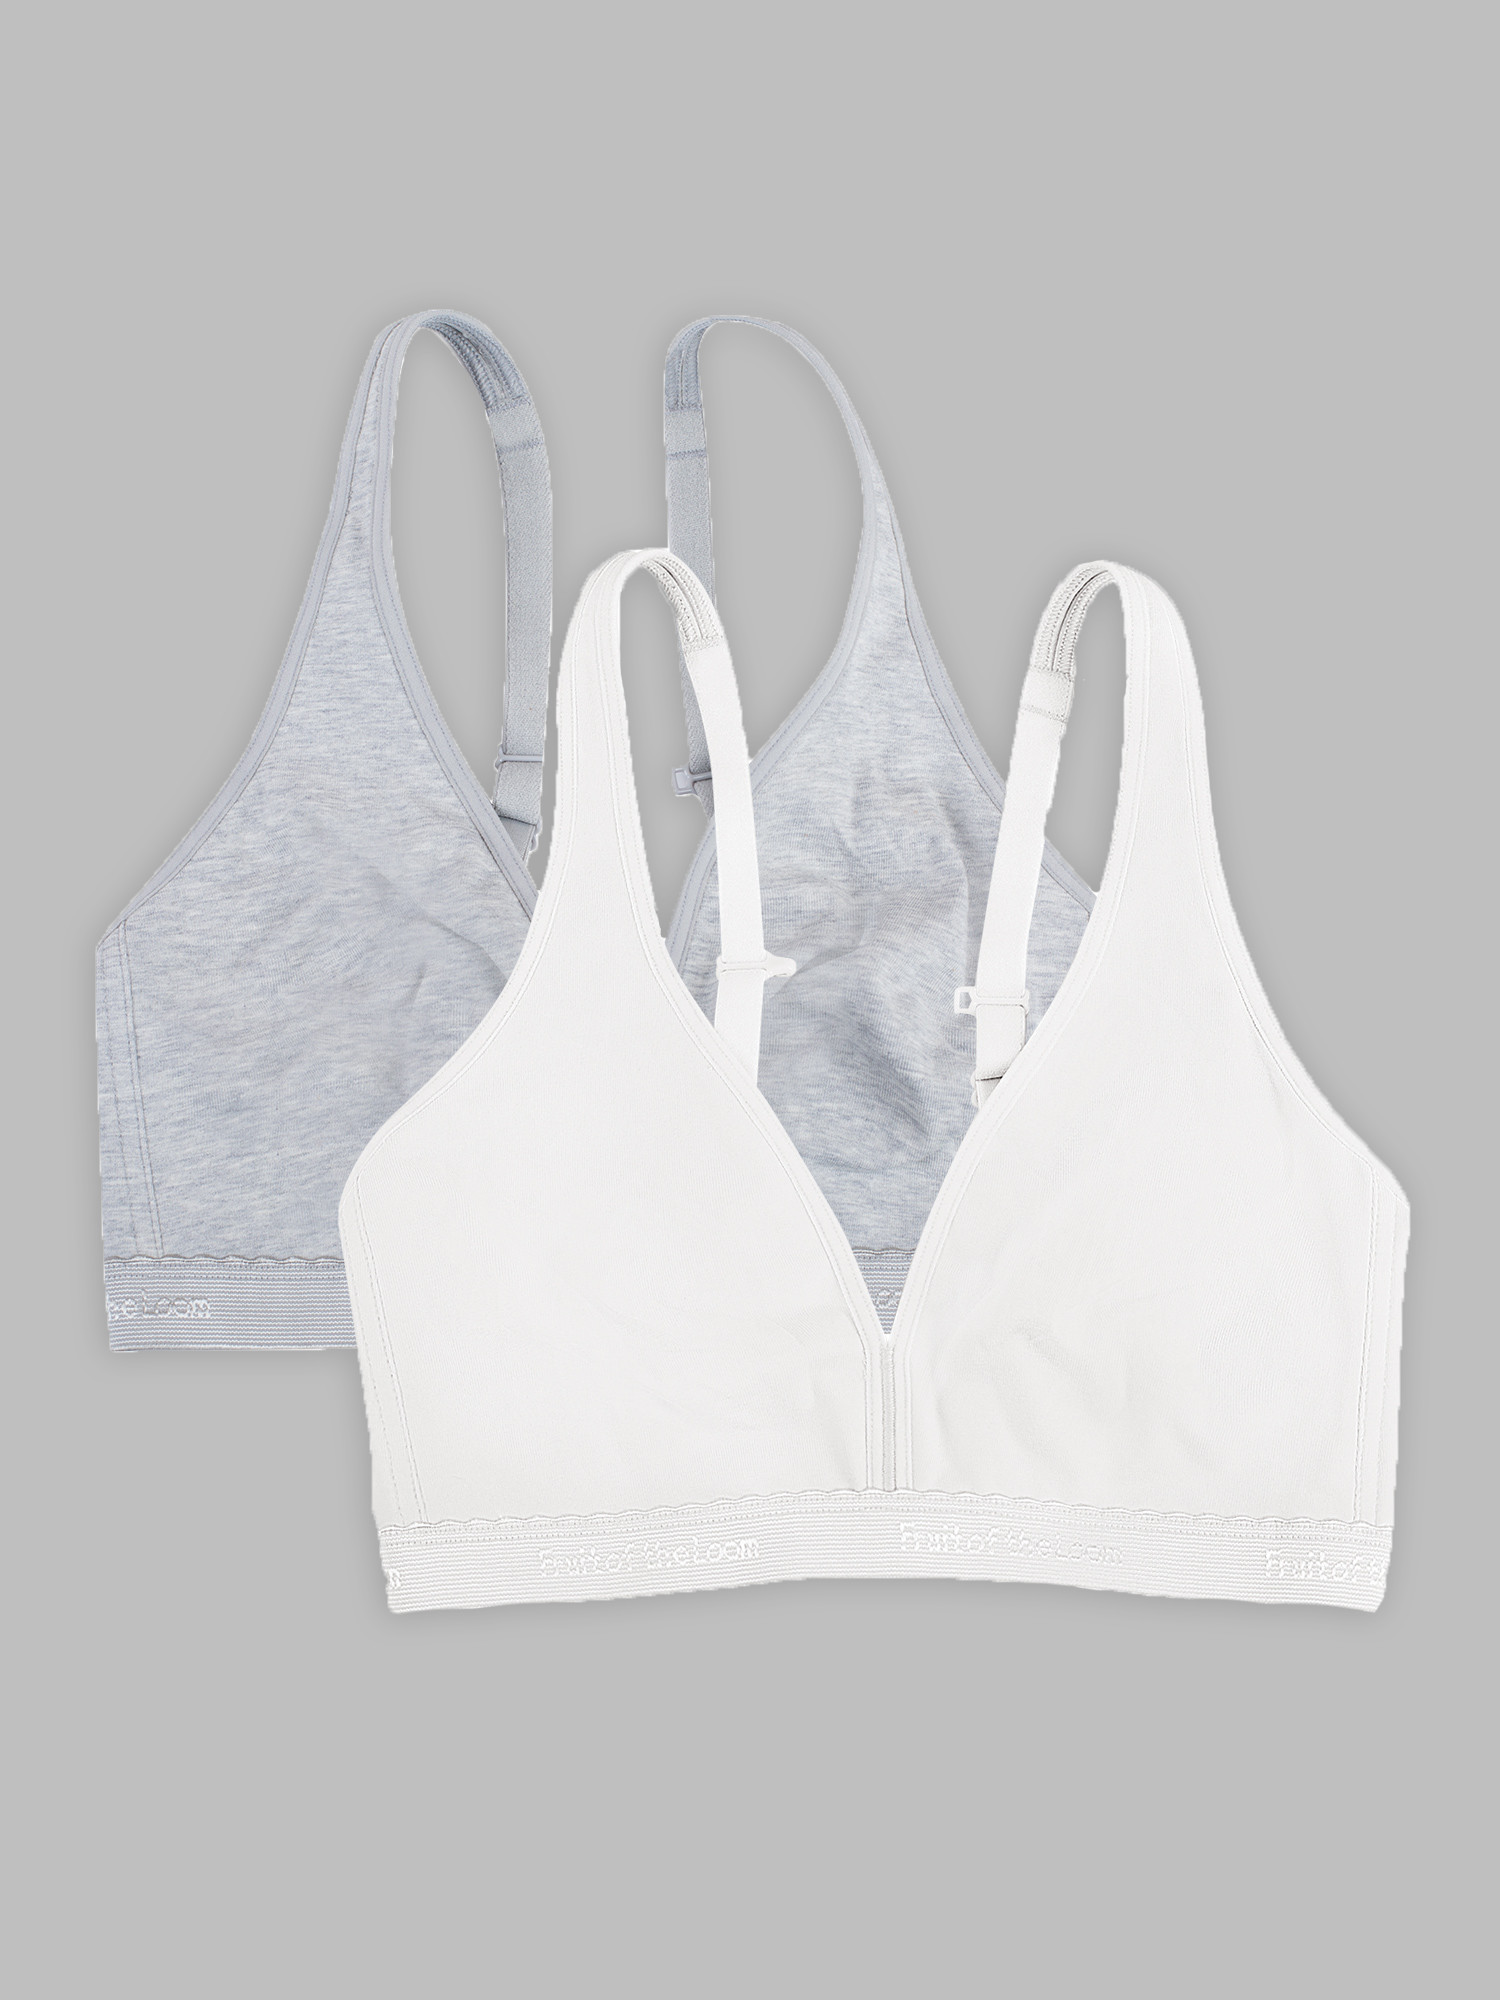 Fruit of the Loom Breathable Cami Bra with Convertible Straps 2 Pack -  Beige/Black 36C at  Women's Clothing store